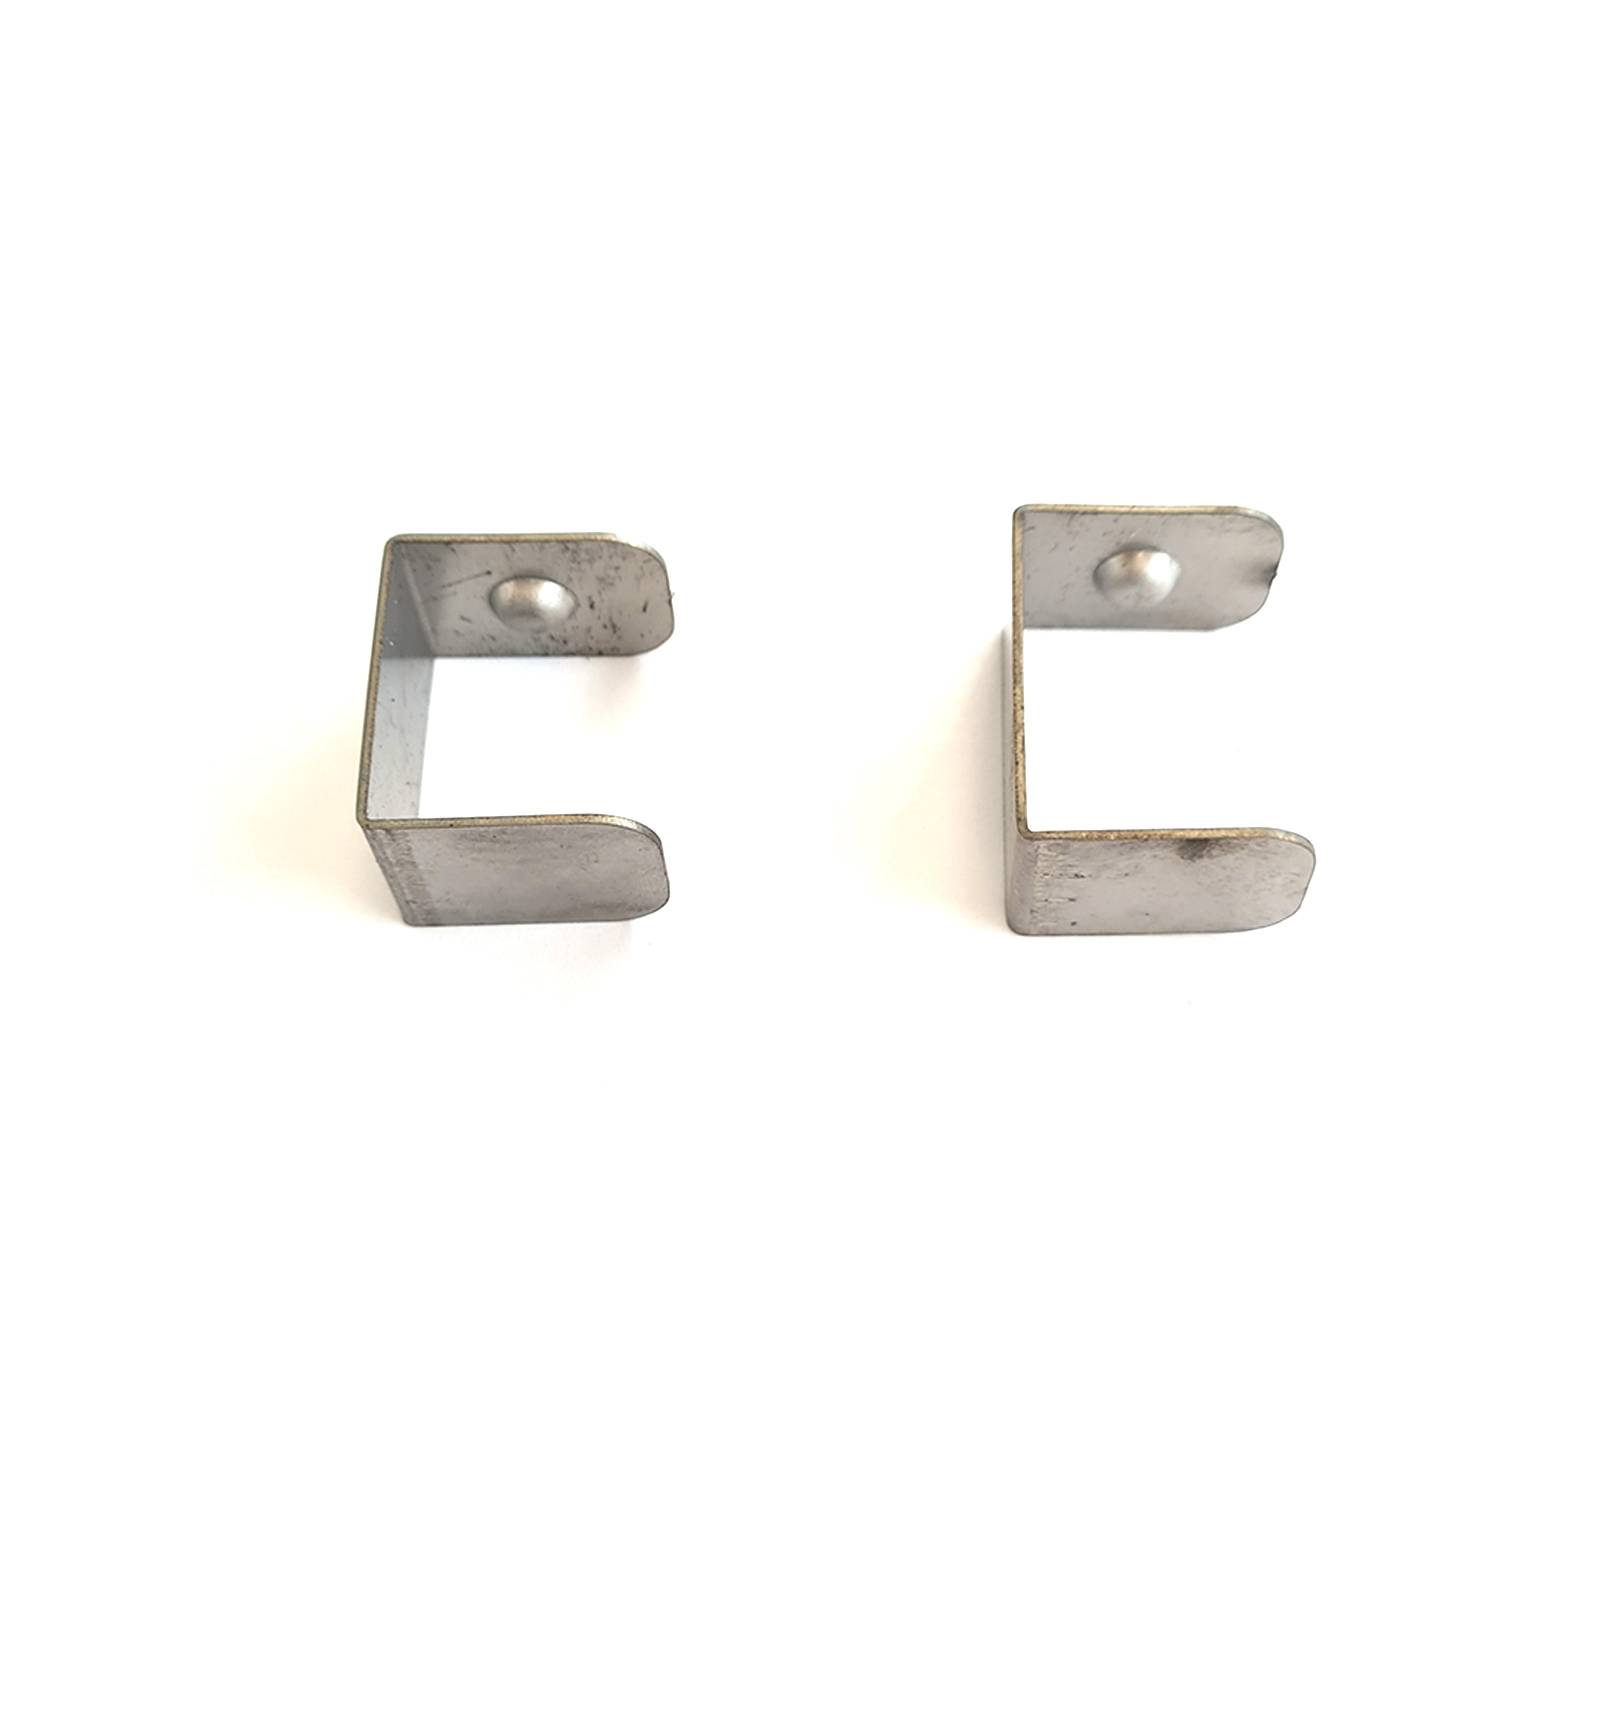 Pair of support plates for FX pedalboard